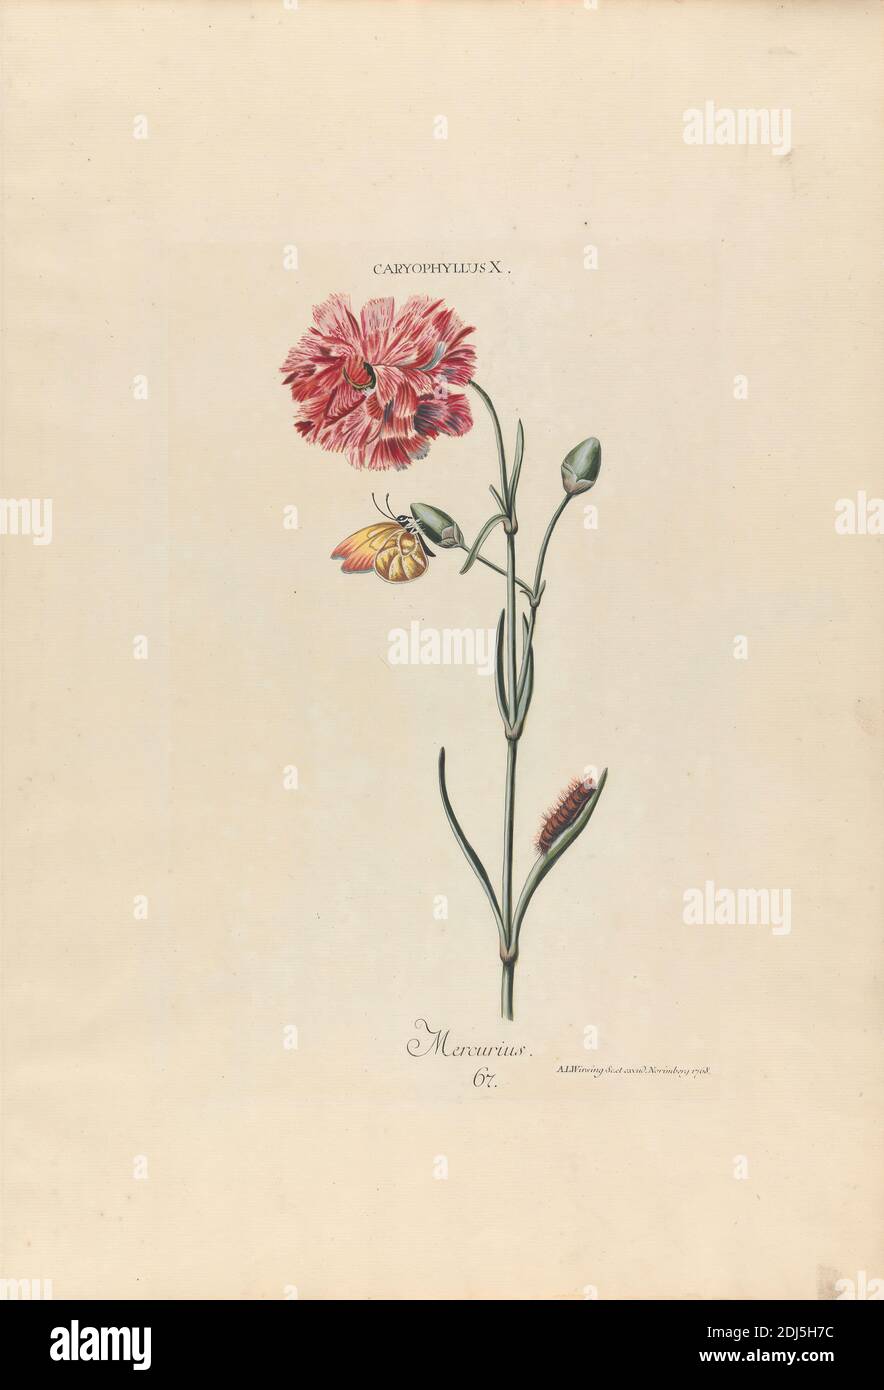 Caryophyllus X. Mercurius. Plate 67 from 'Hortus Nitidissimis Omnem per Annum Superbiens Floribus', Nuremberg, 1768, Print made by Adam Ludwig Wirsing, 1733–1797, German, after Georg Dionysius Ehret, 1708–1770, German, 1768, Engraving with original hand coloring on medium, slightly textured, cream laid paper, Sheet: 20 x 14 inches (50.8 x 35.6 cm), botanical subject, botany, butterfly, caterpillar, flower (plant), plant, science Stock Photo